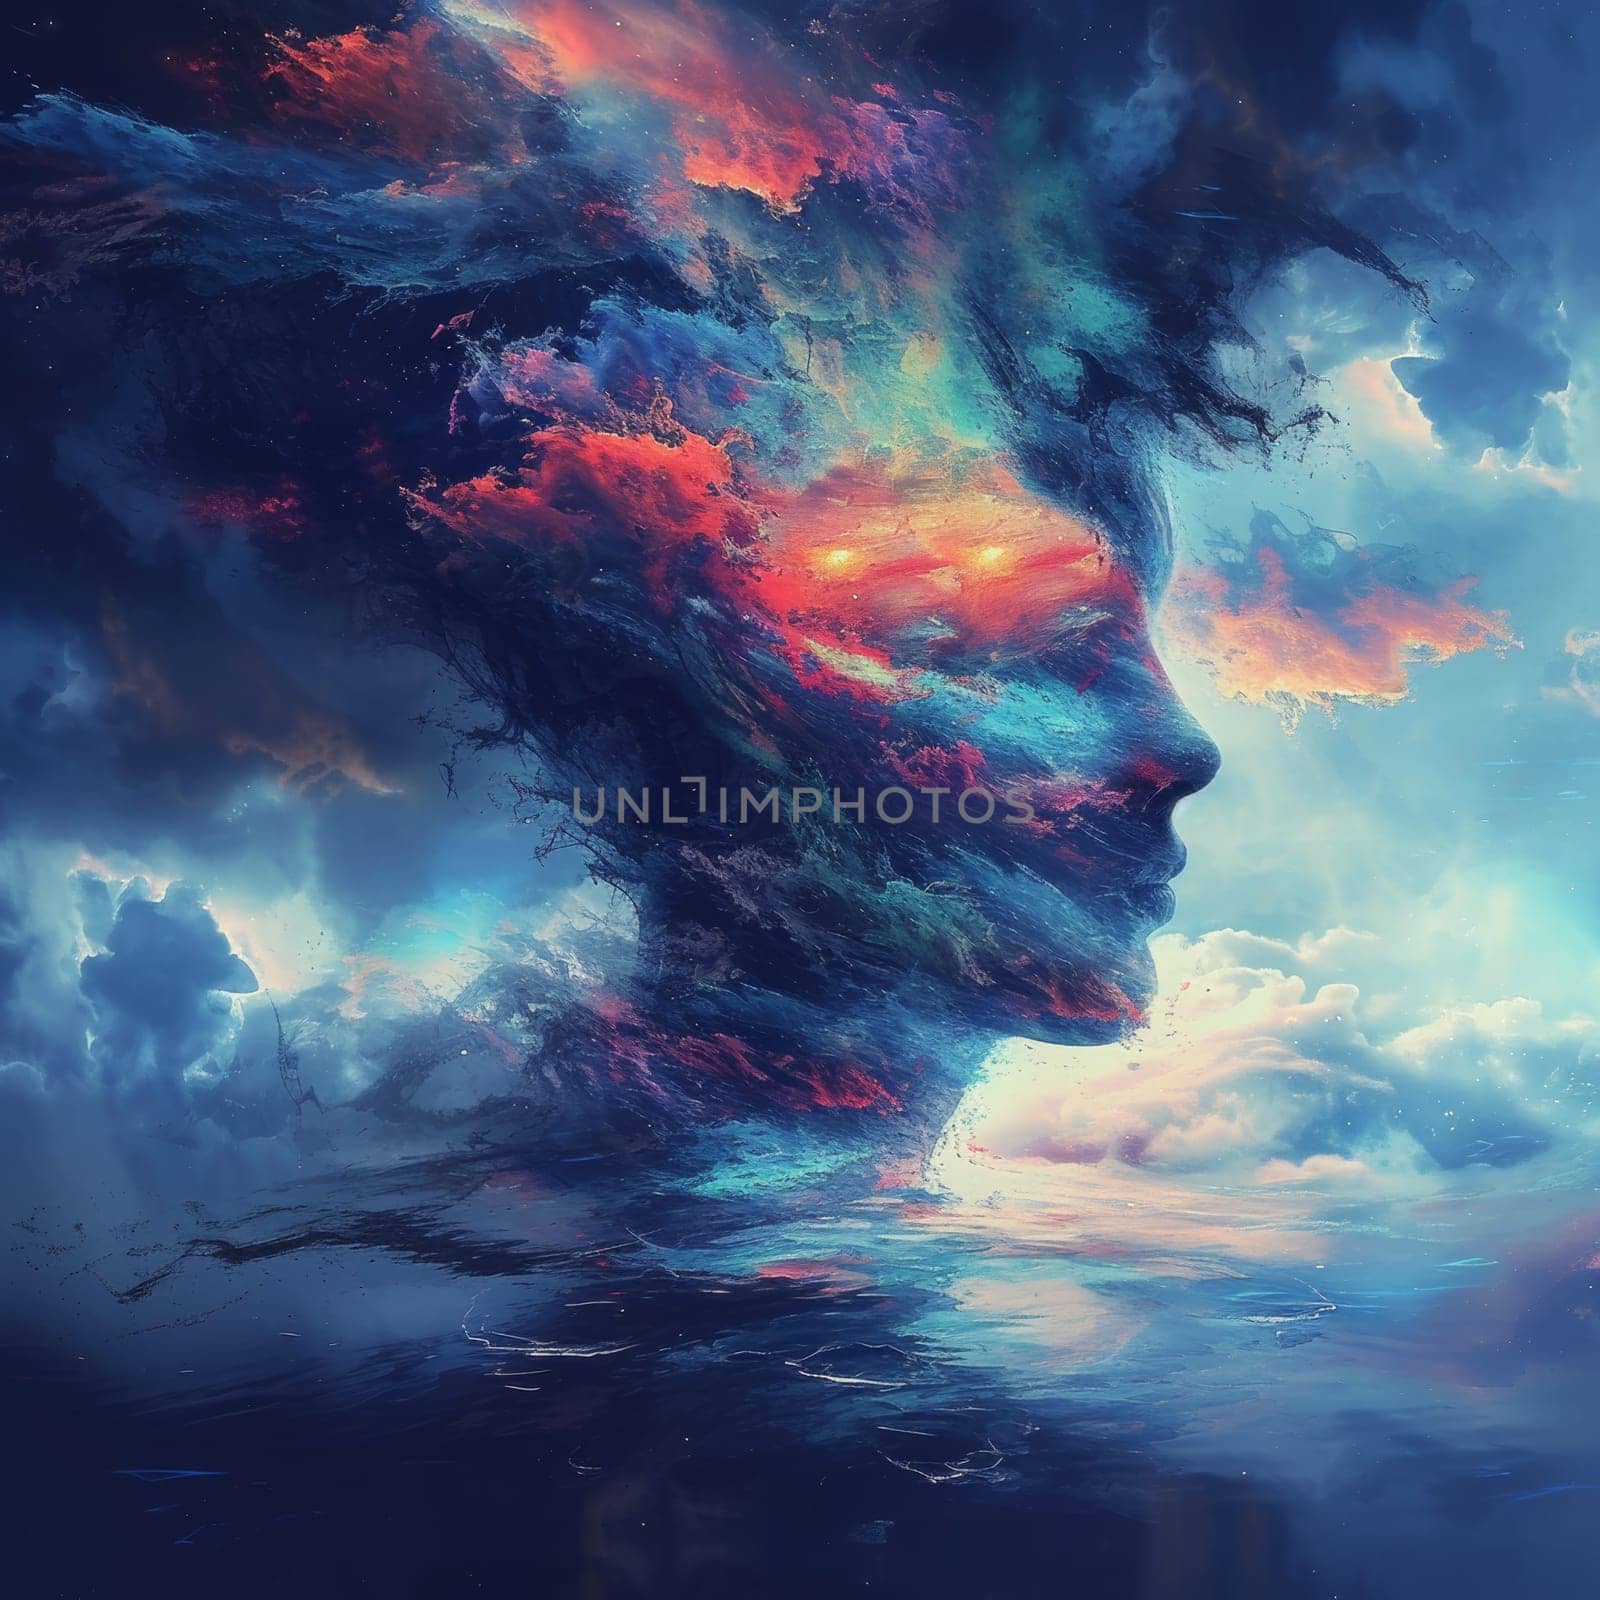 A woman's face is shown in a painting with colorful clouds